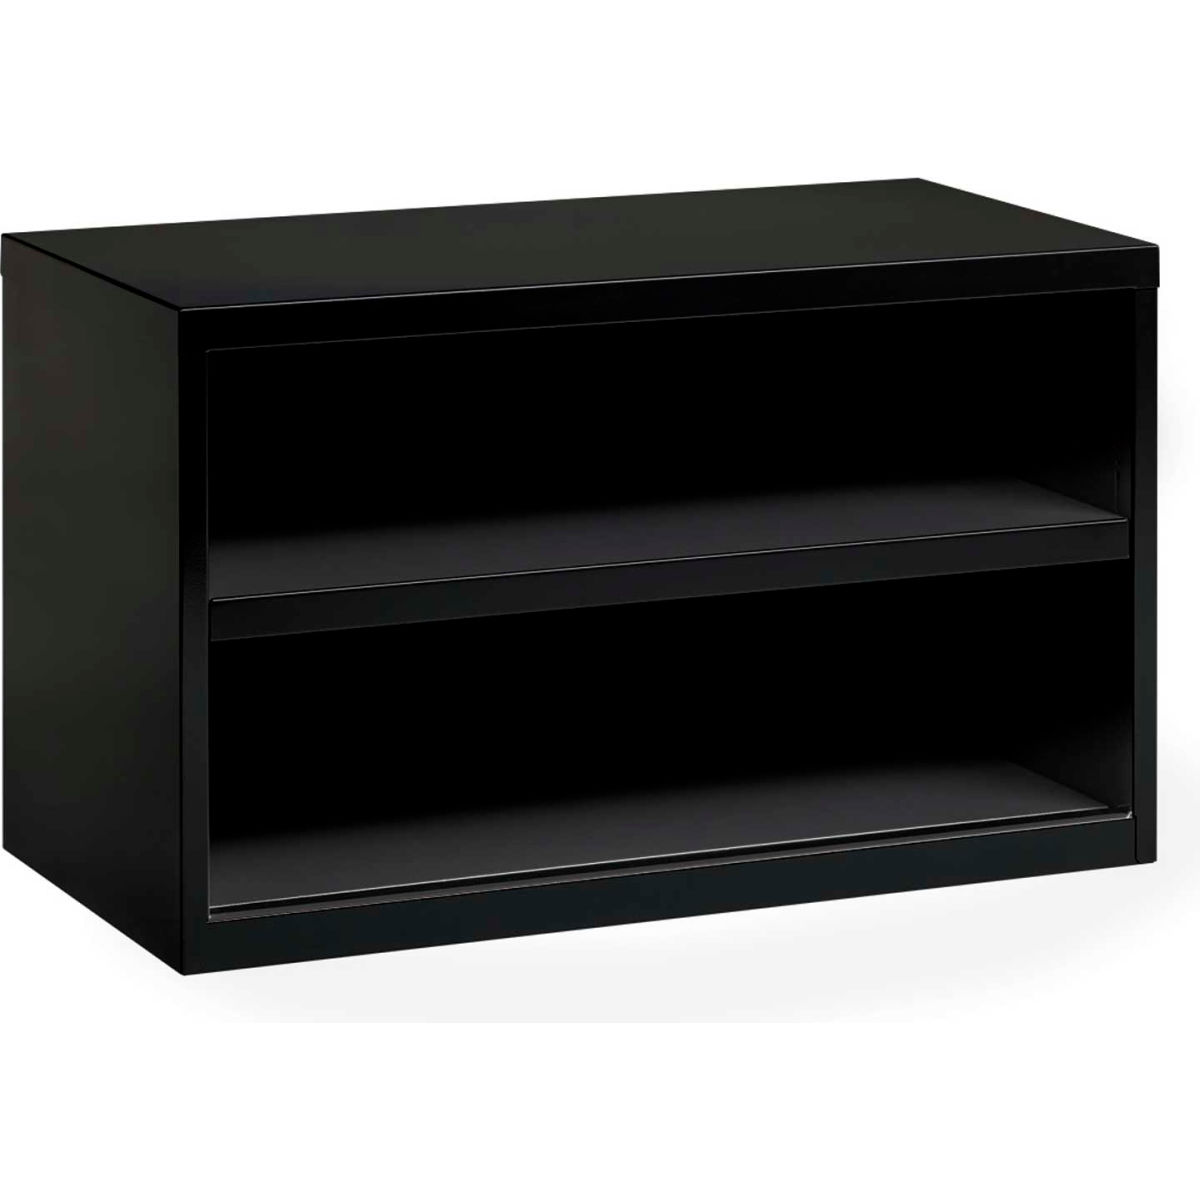 Picture of Hirsh Industries 695760 Interion 36 in. Low Open Credenza - Black